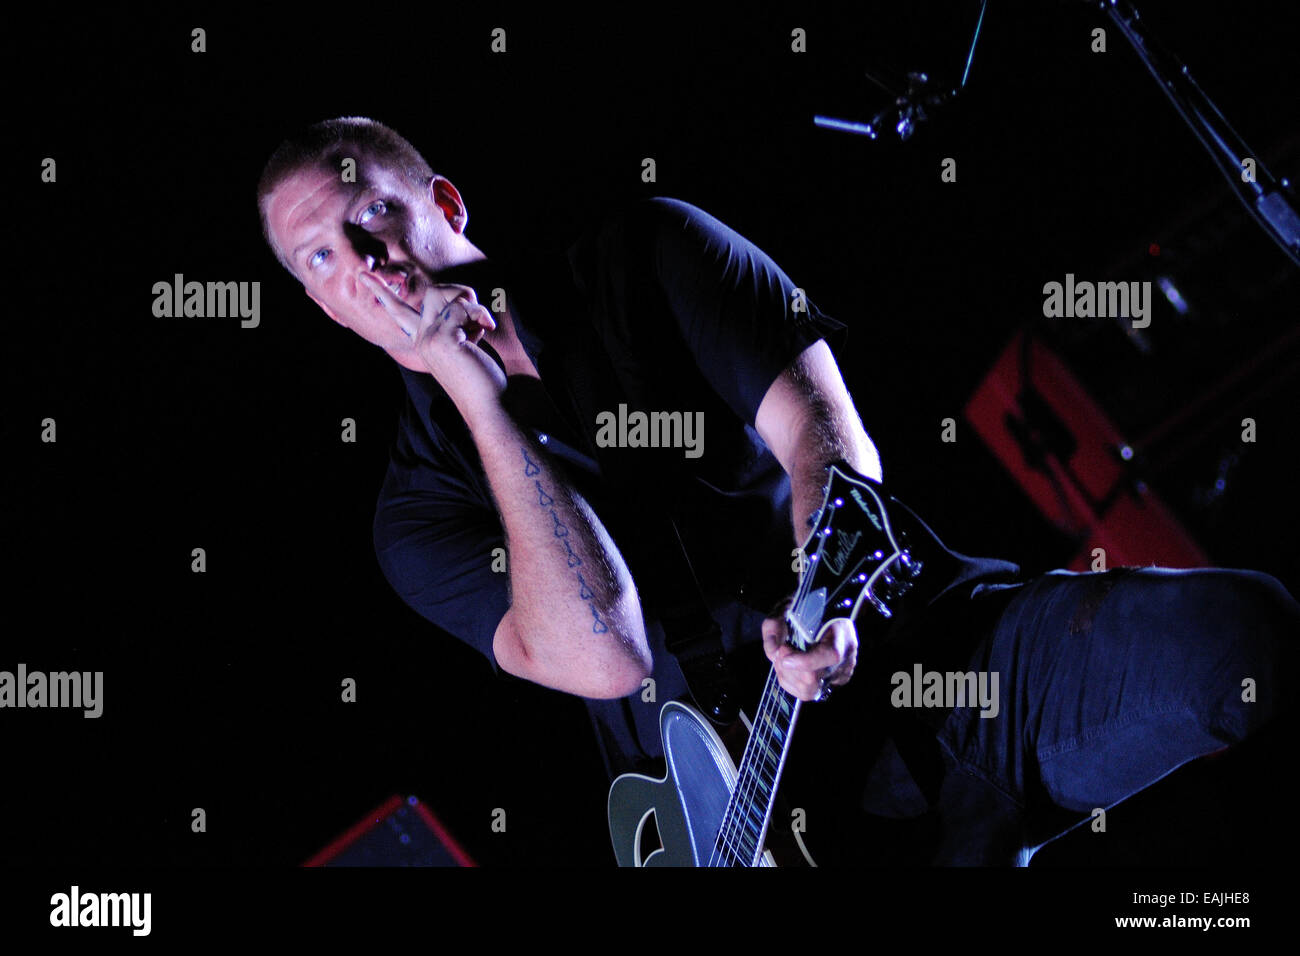 BENICASIM, SPAIN - JULY 18: Josh Homme, singer of Queens of the Stone Age (band), tell to shut up at FIB. Stock Photo